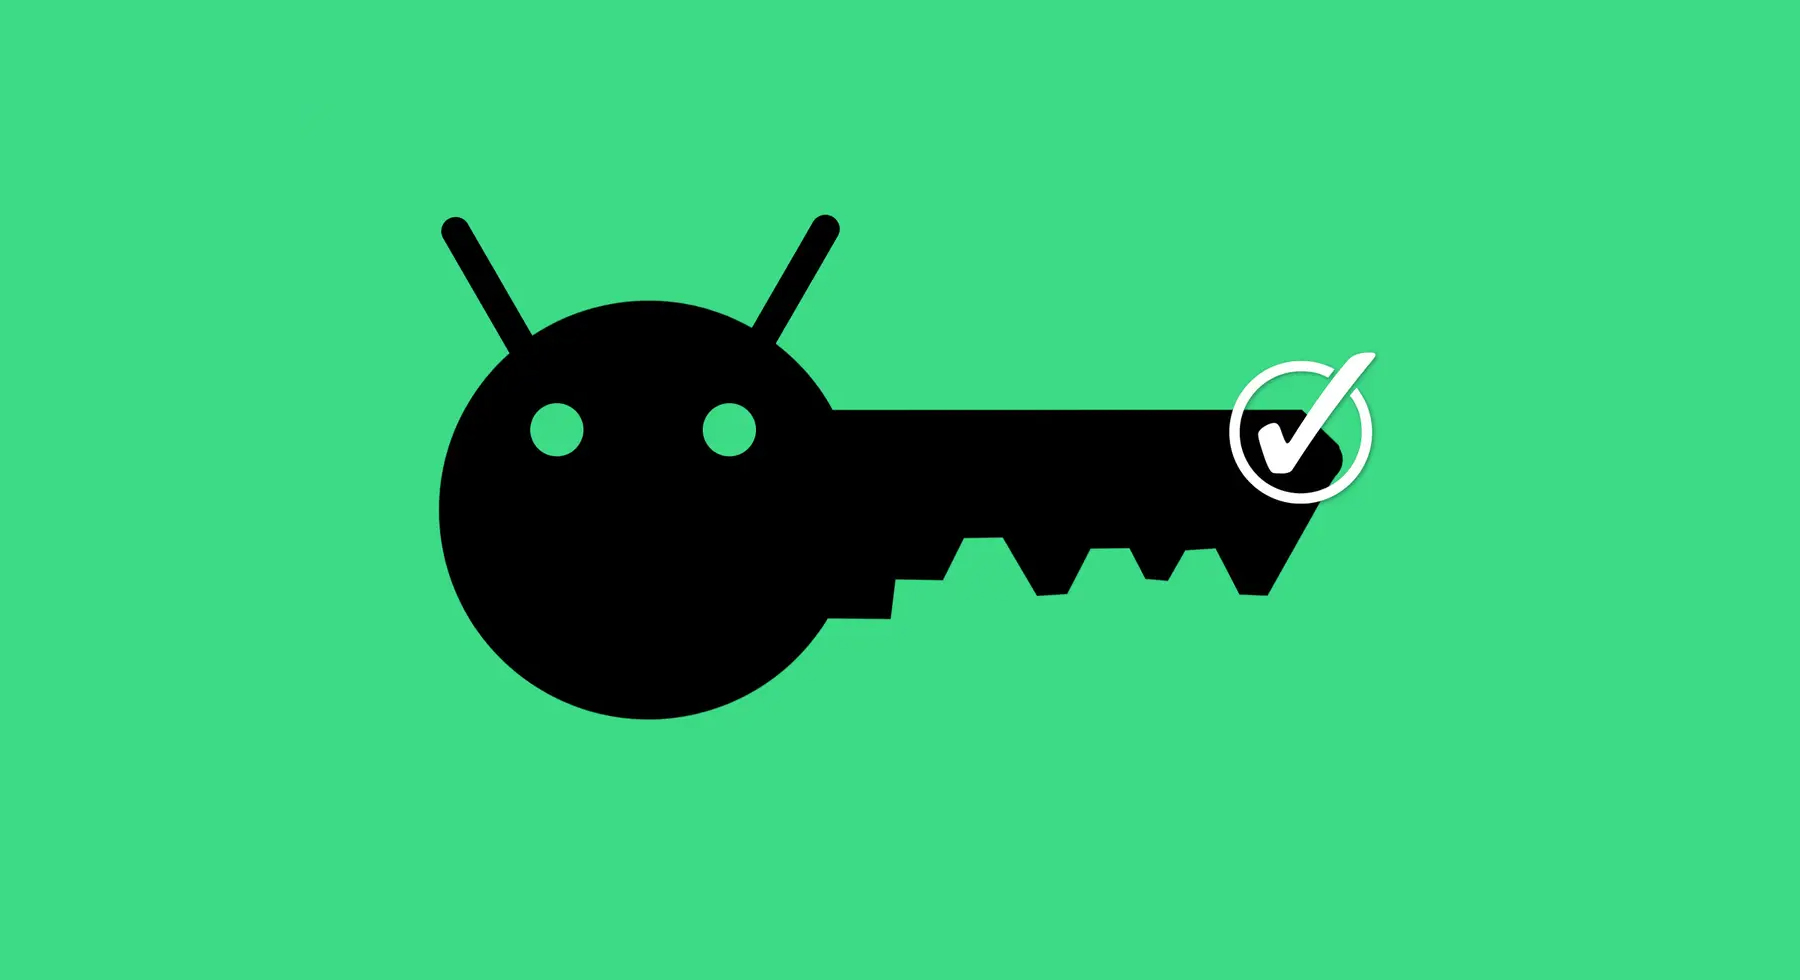 Step-by-step Android security